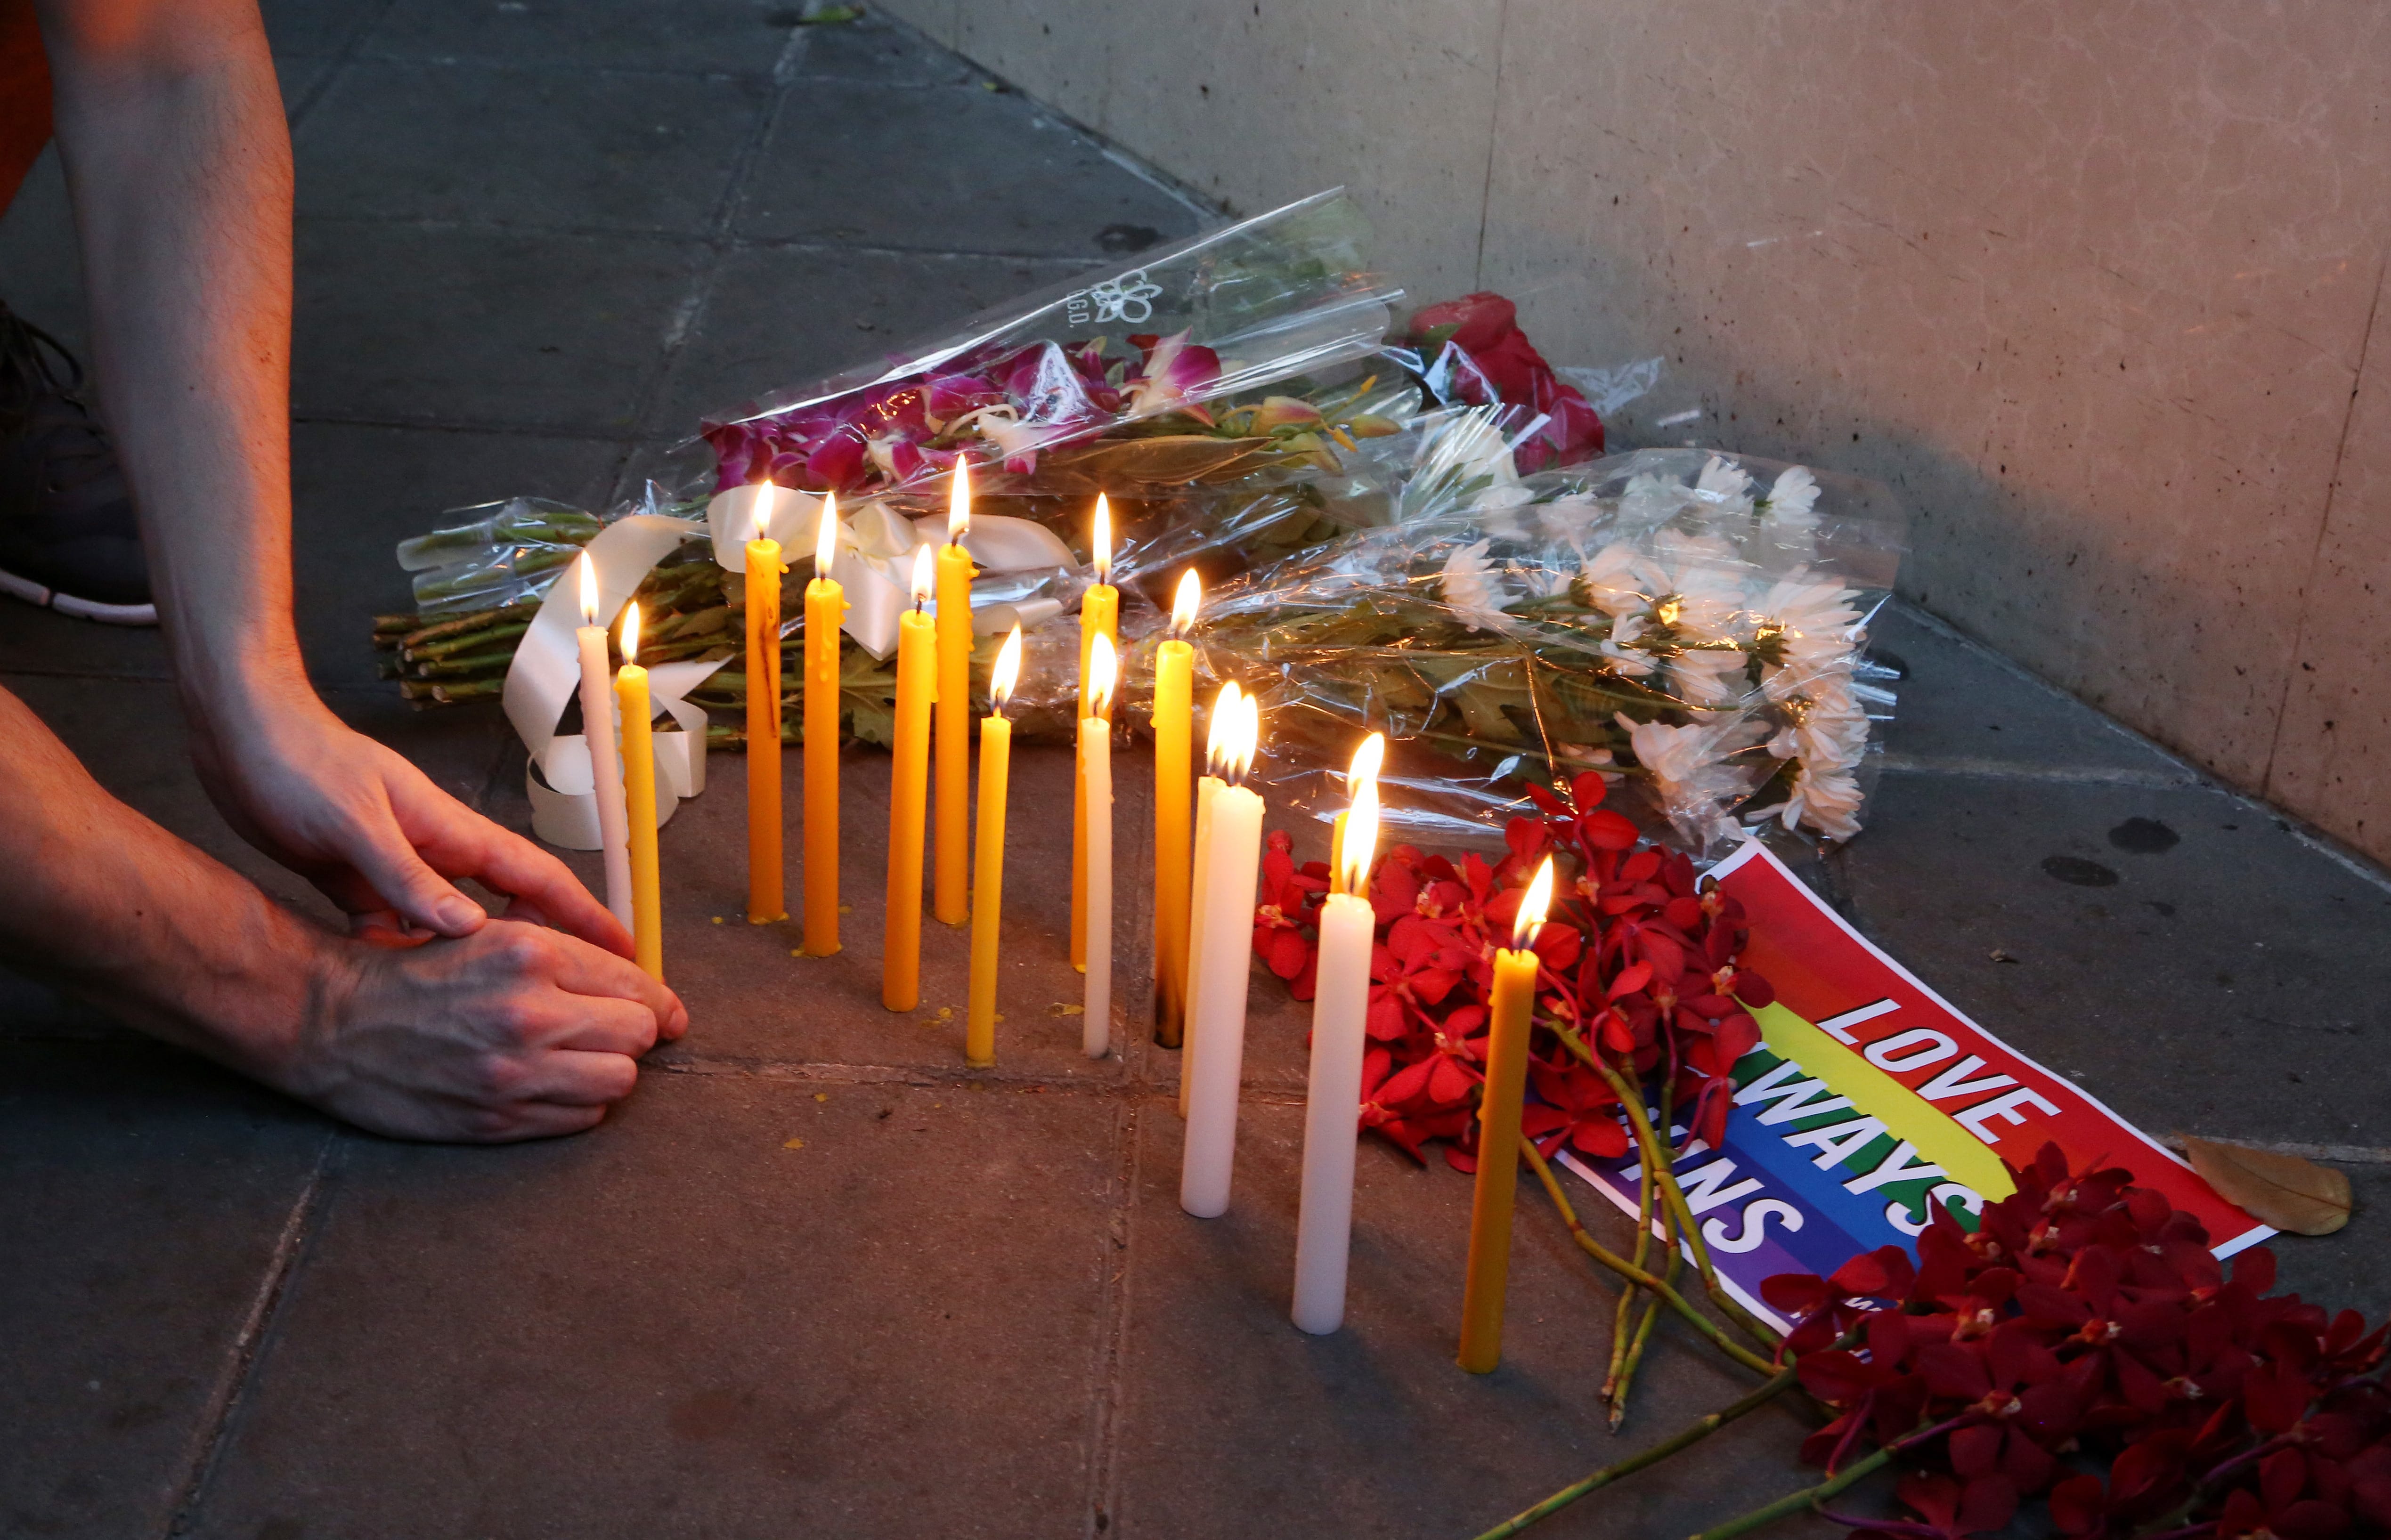 A vigil for the victims of the shooting at a gay nightclub in Florida on Sunday will be held in Washougal tonight.